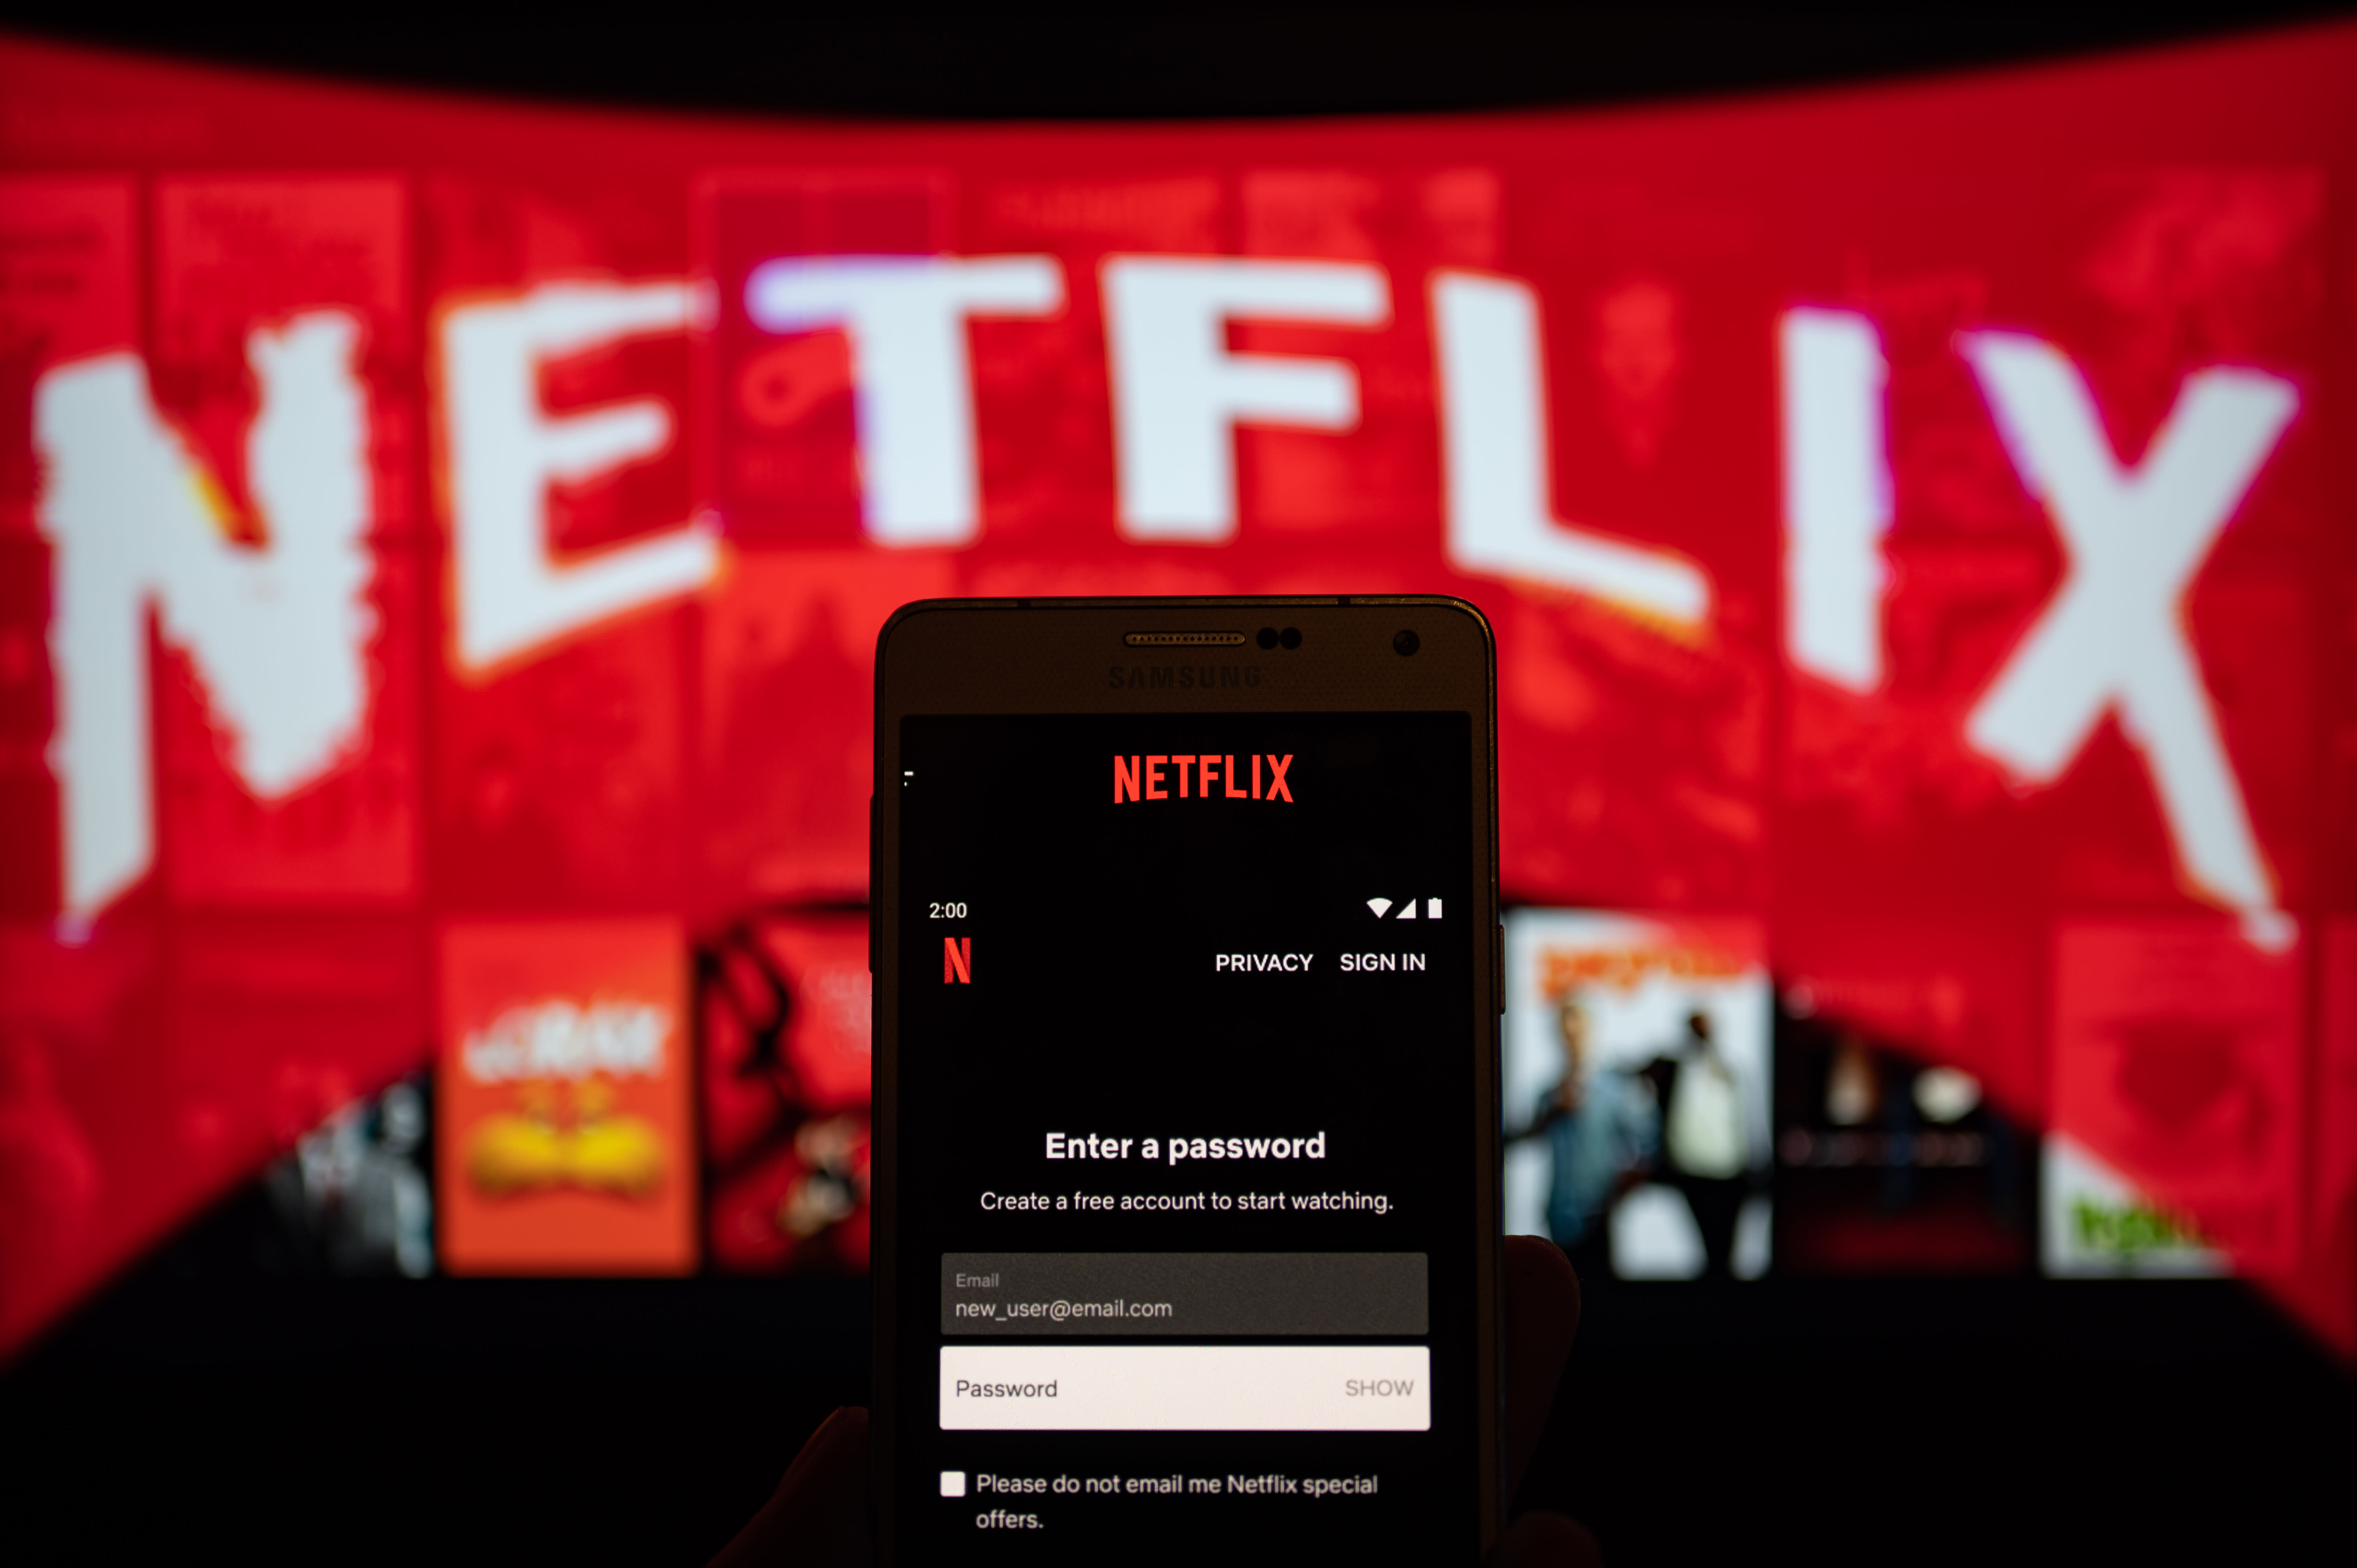 Oppenheimer says U.S. crackdown on password sharing could be big gain for Netflix